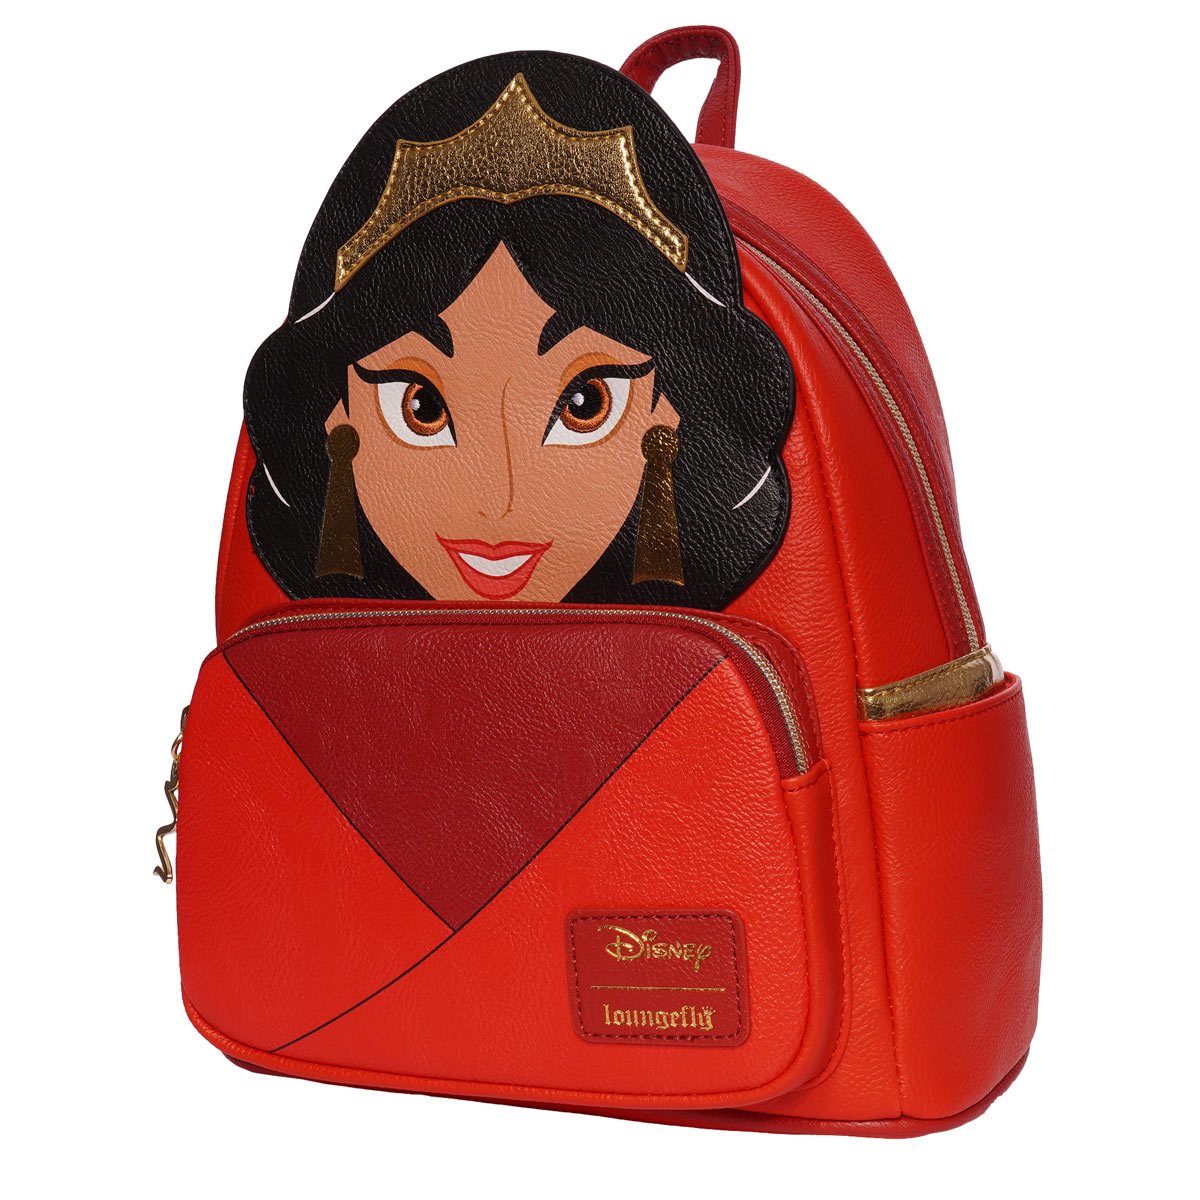 Aladdin Princess Jasmine Red Outfit Cosplay Mini-Backpack ...